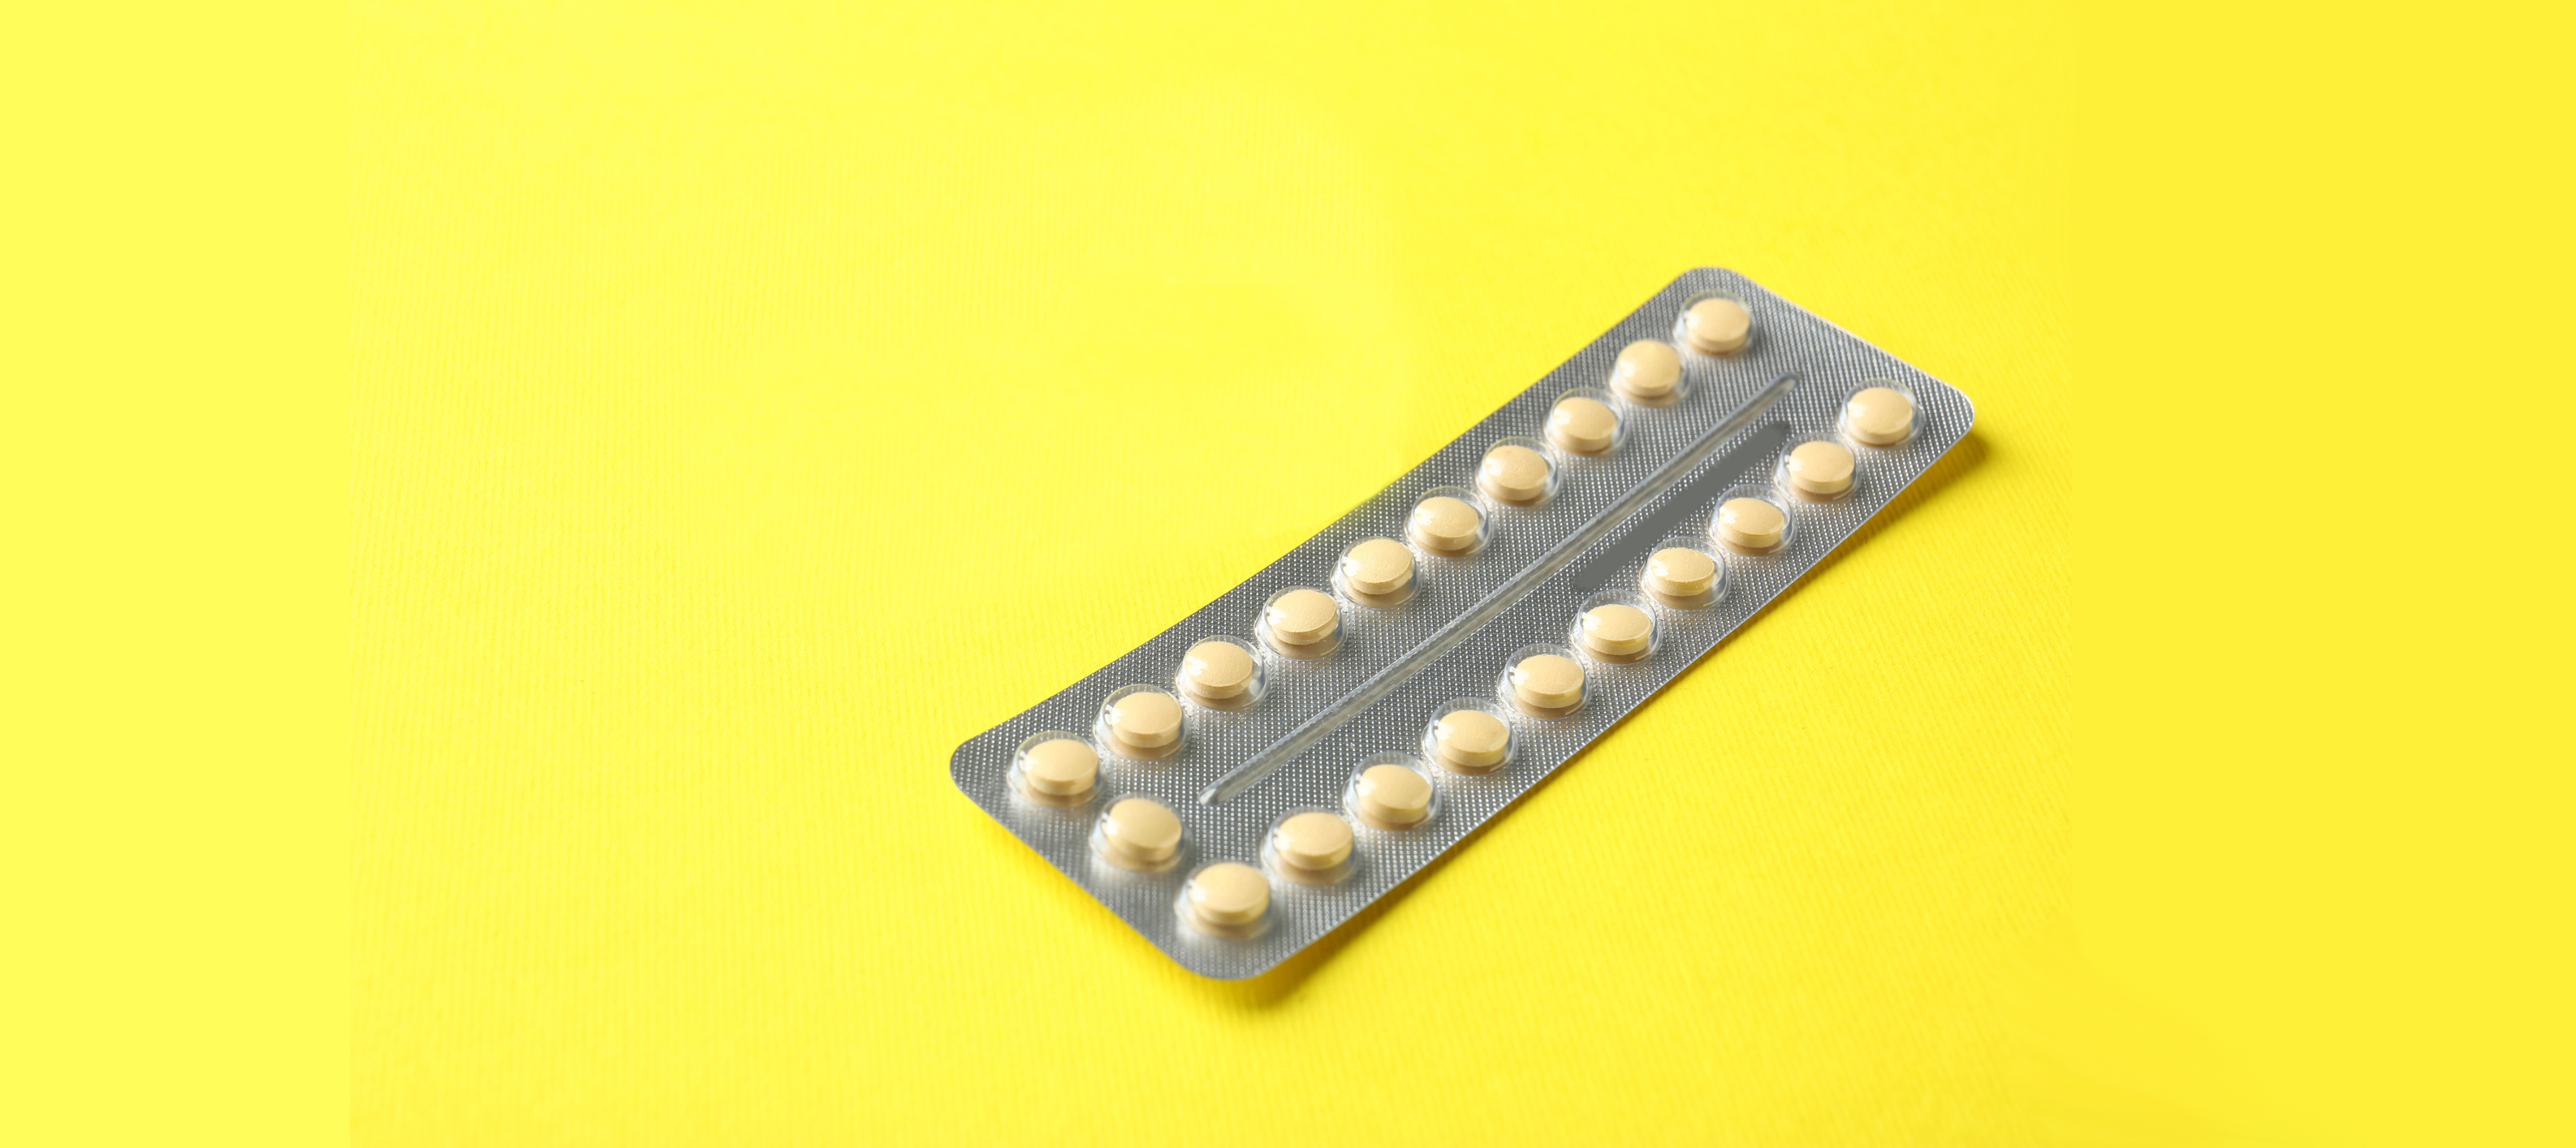 Birth control pills sit on a table